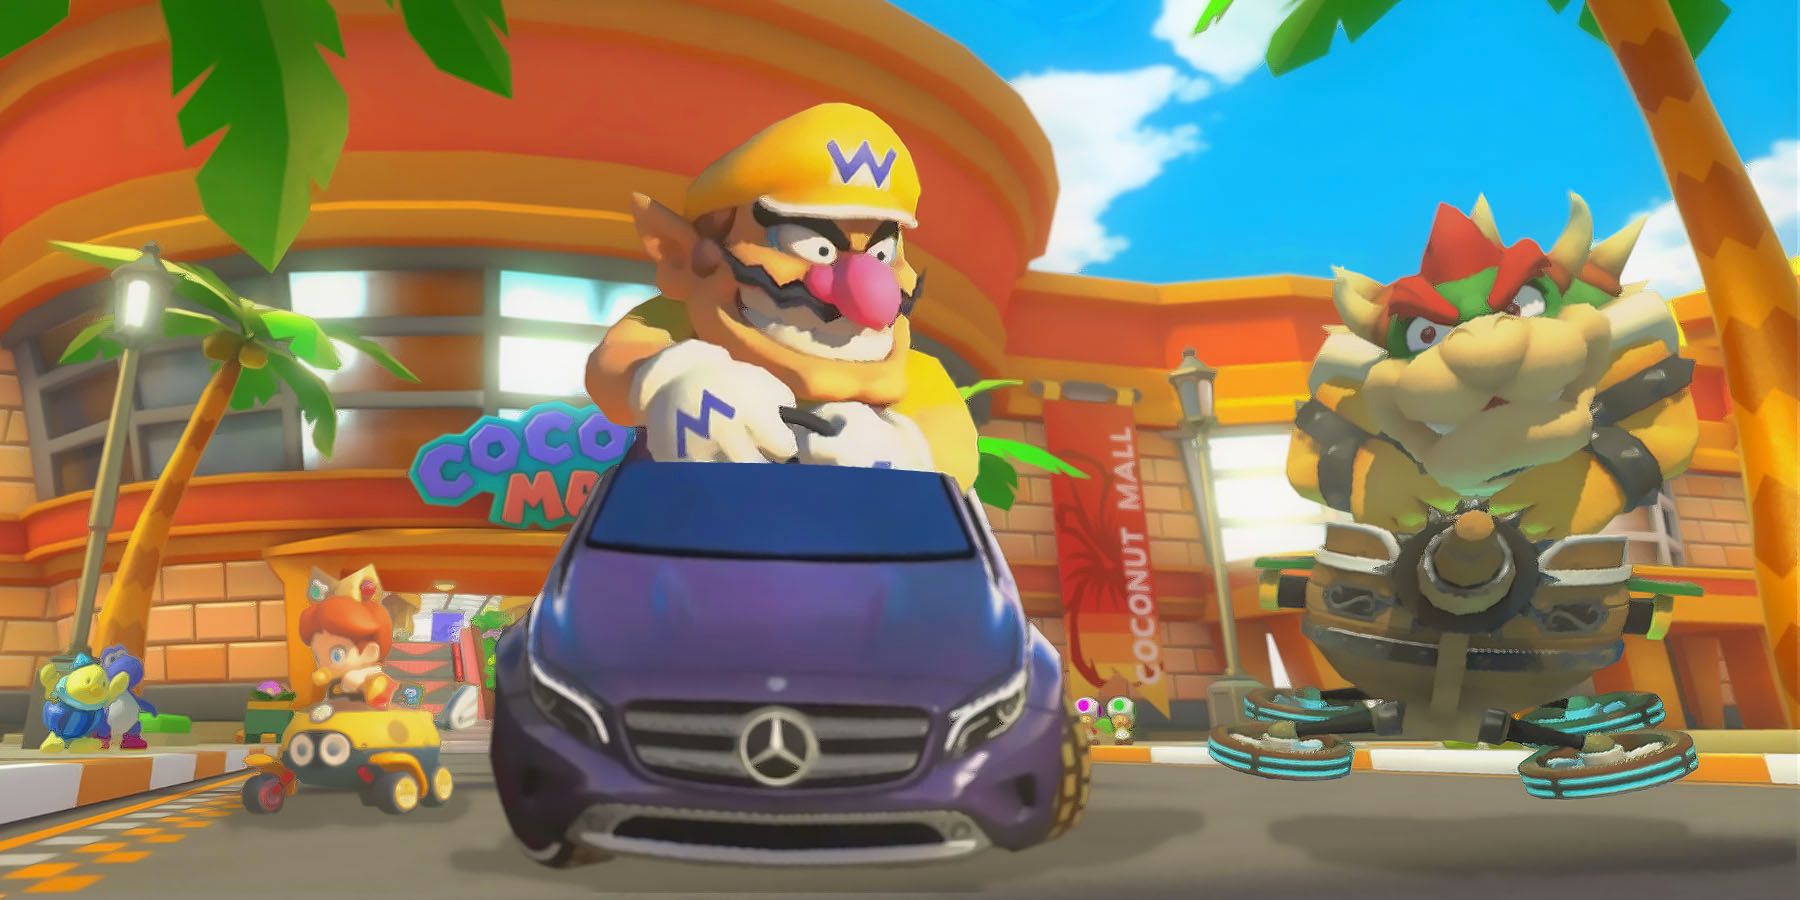 Best Mario Kart 8 set-up, Top kart-combos to dominate on the track